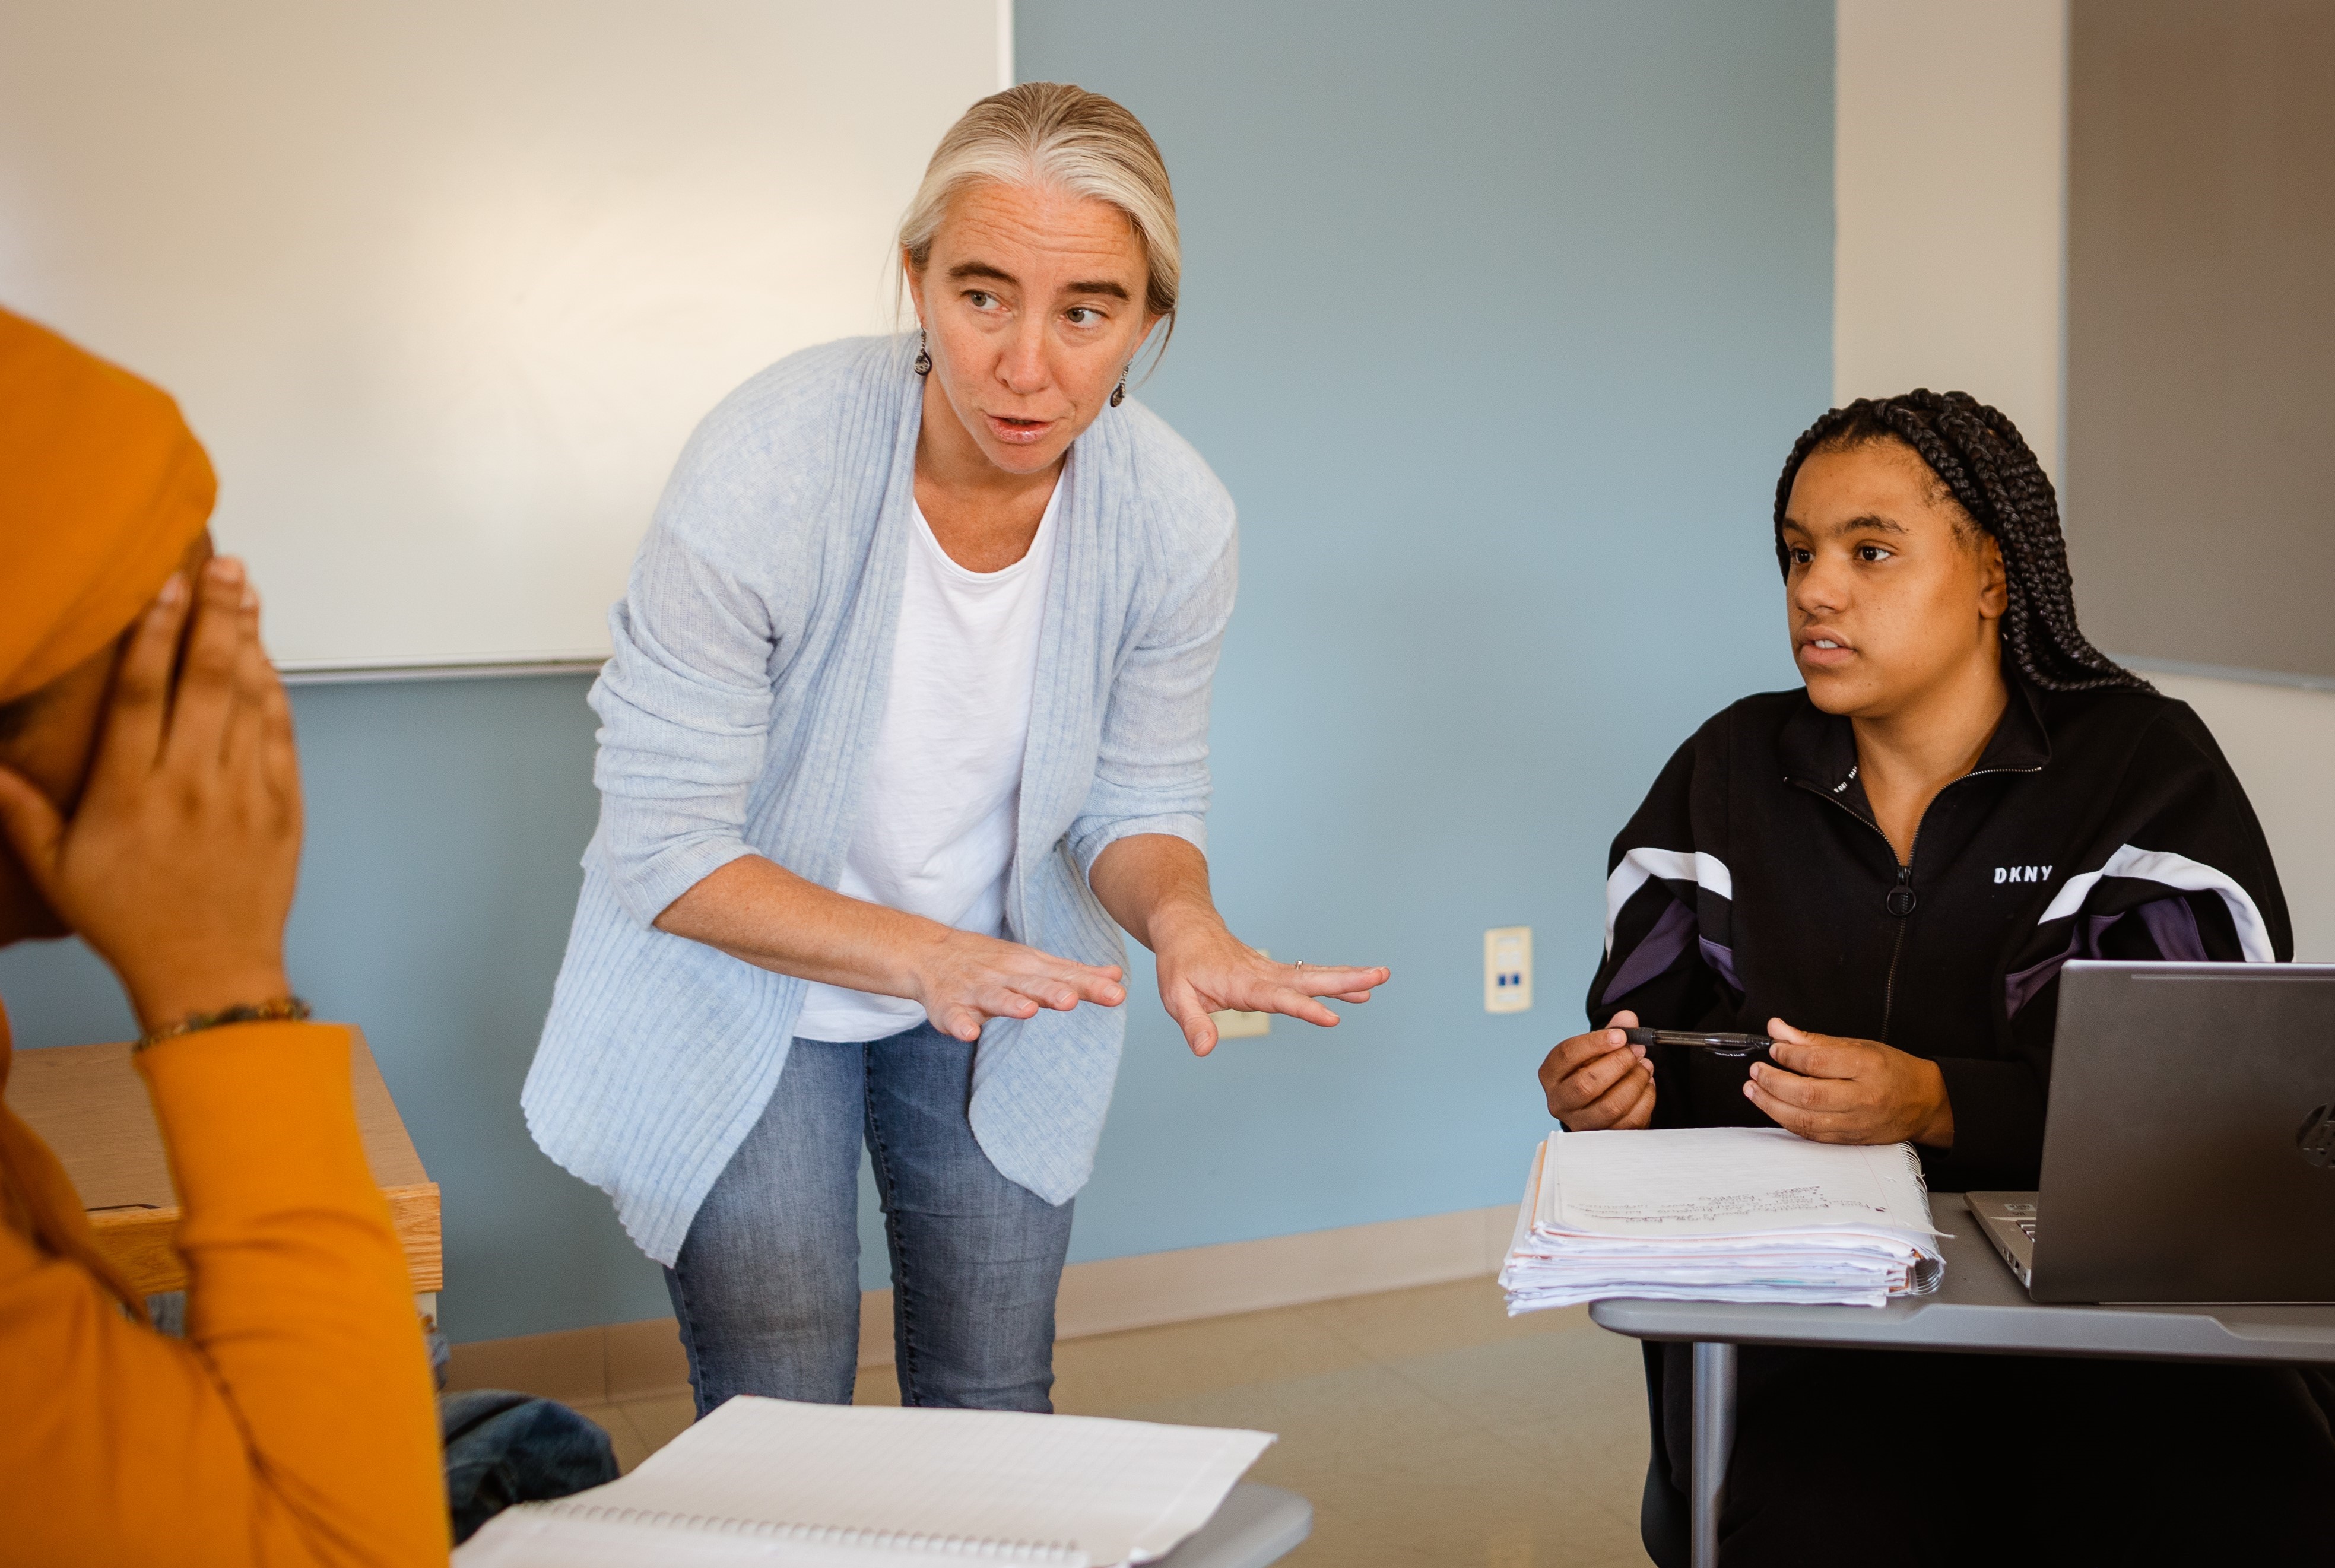 Professor speaking with two students in the classroom